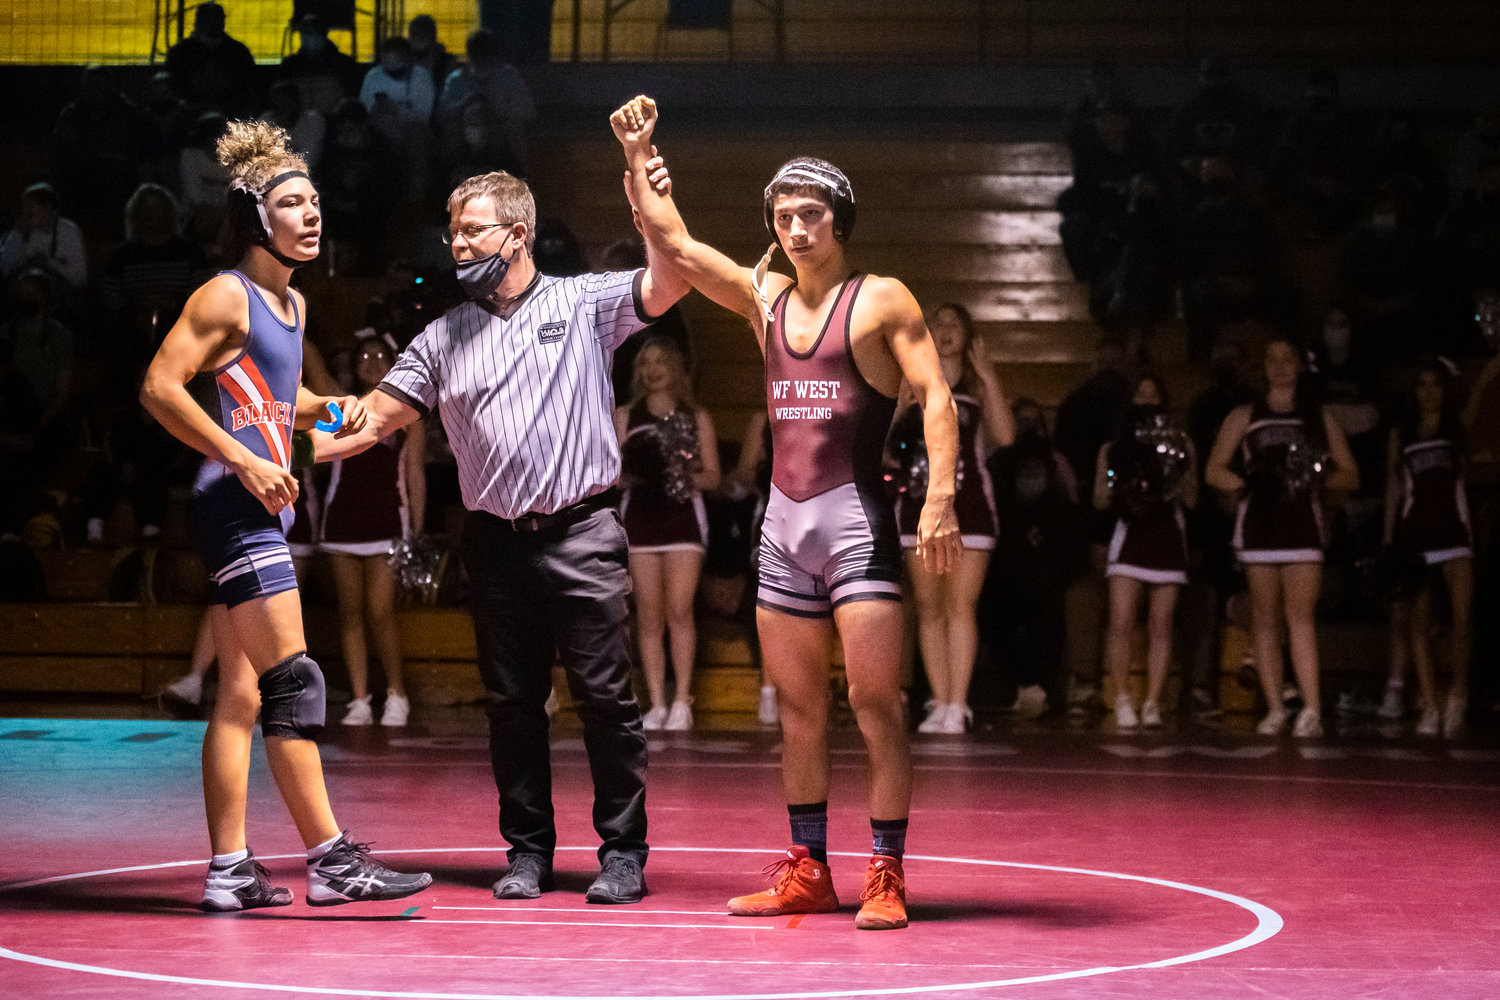 W.F. West Senior Bo Davis has his hand raised after defeating an opponent from Black Hills while wrestling at 138 Thursday night in Chehalis.